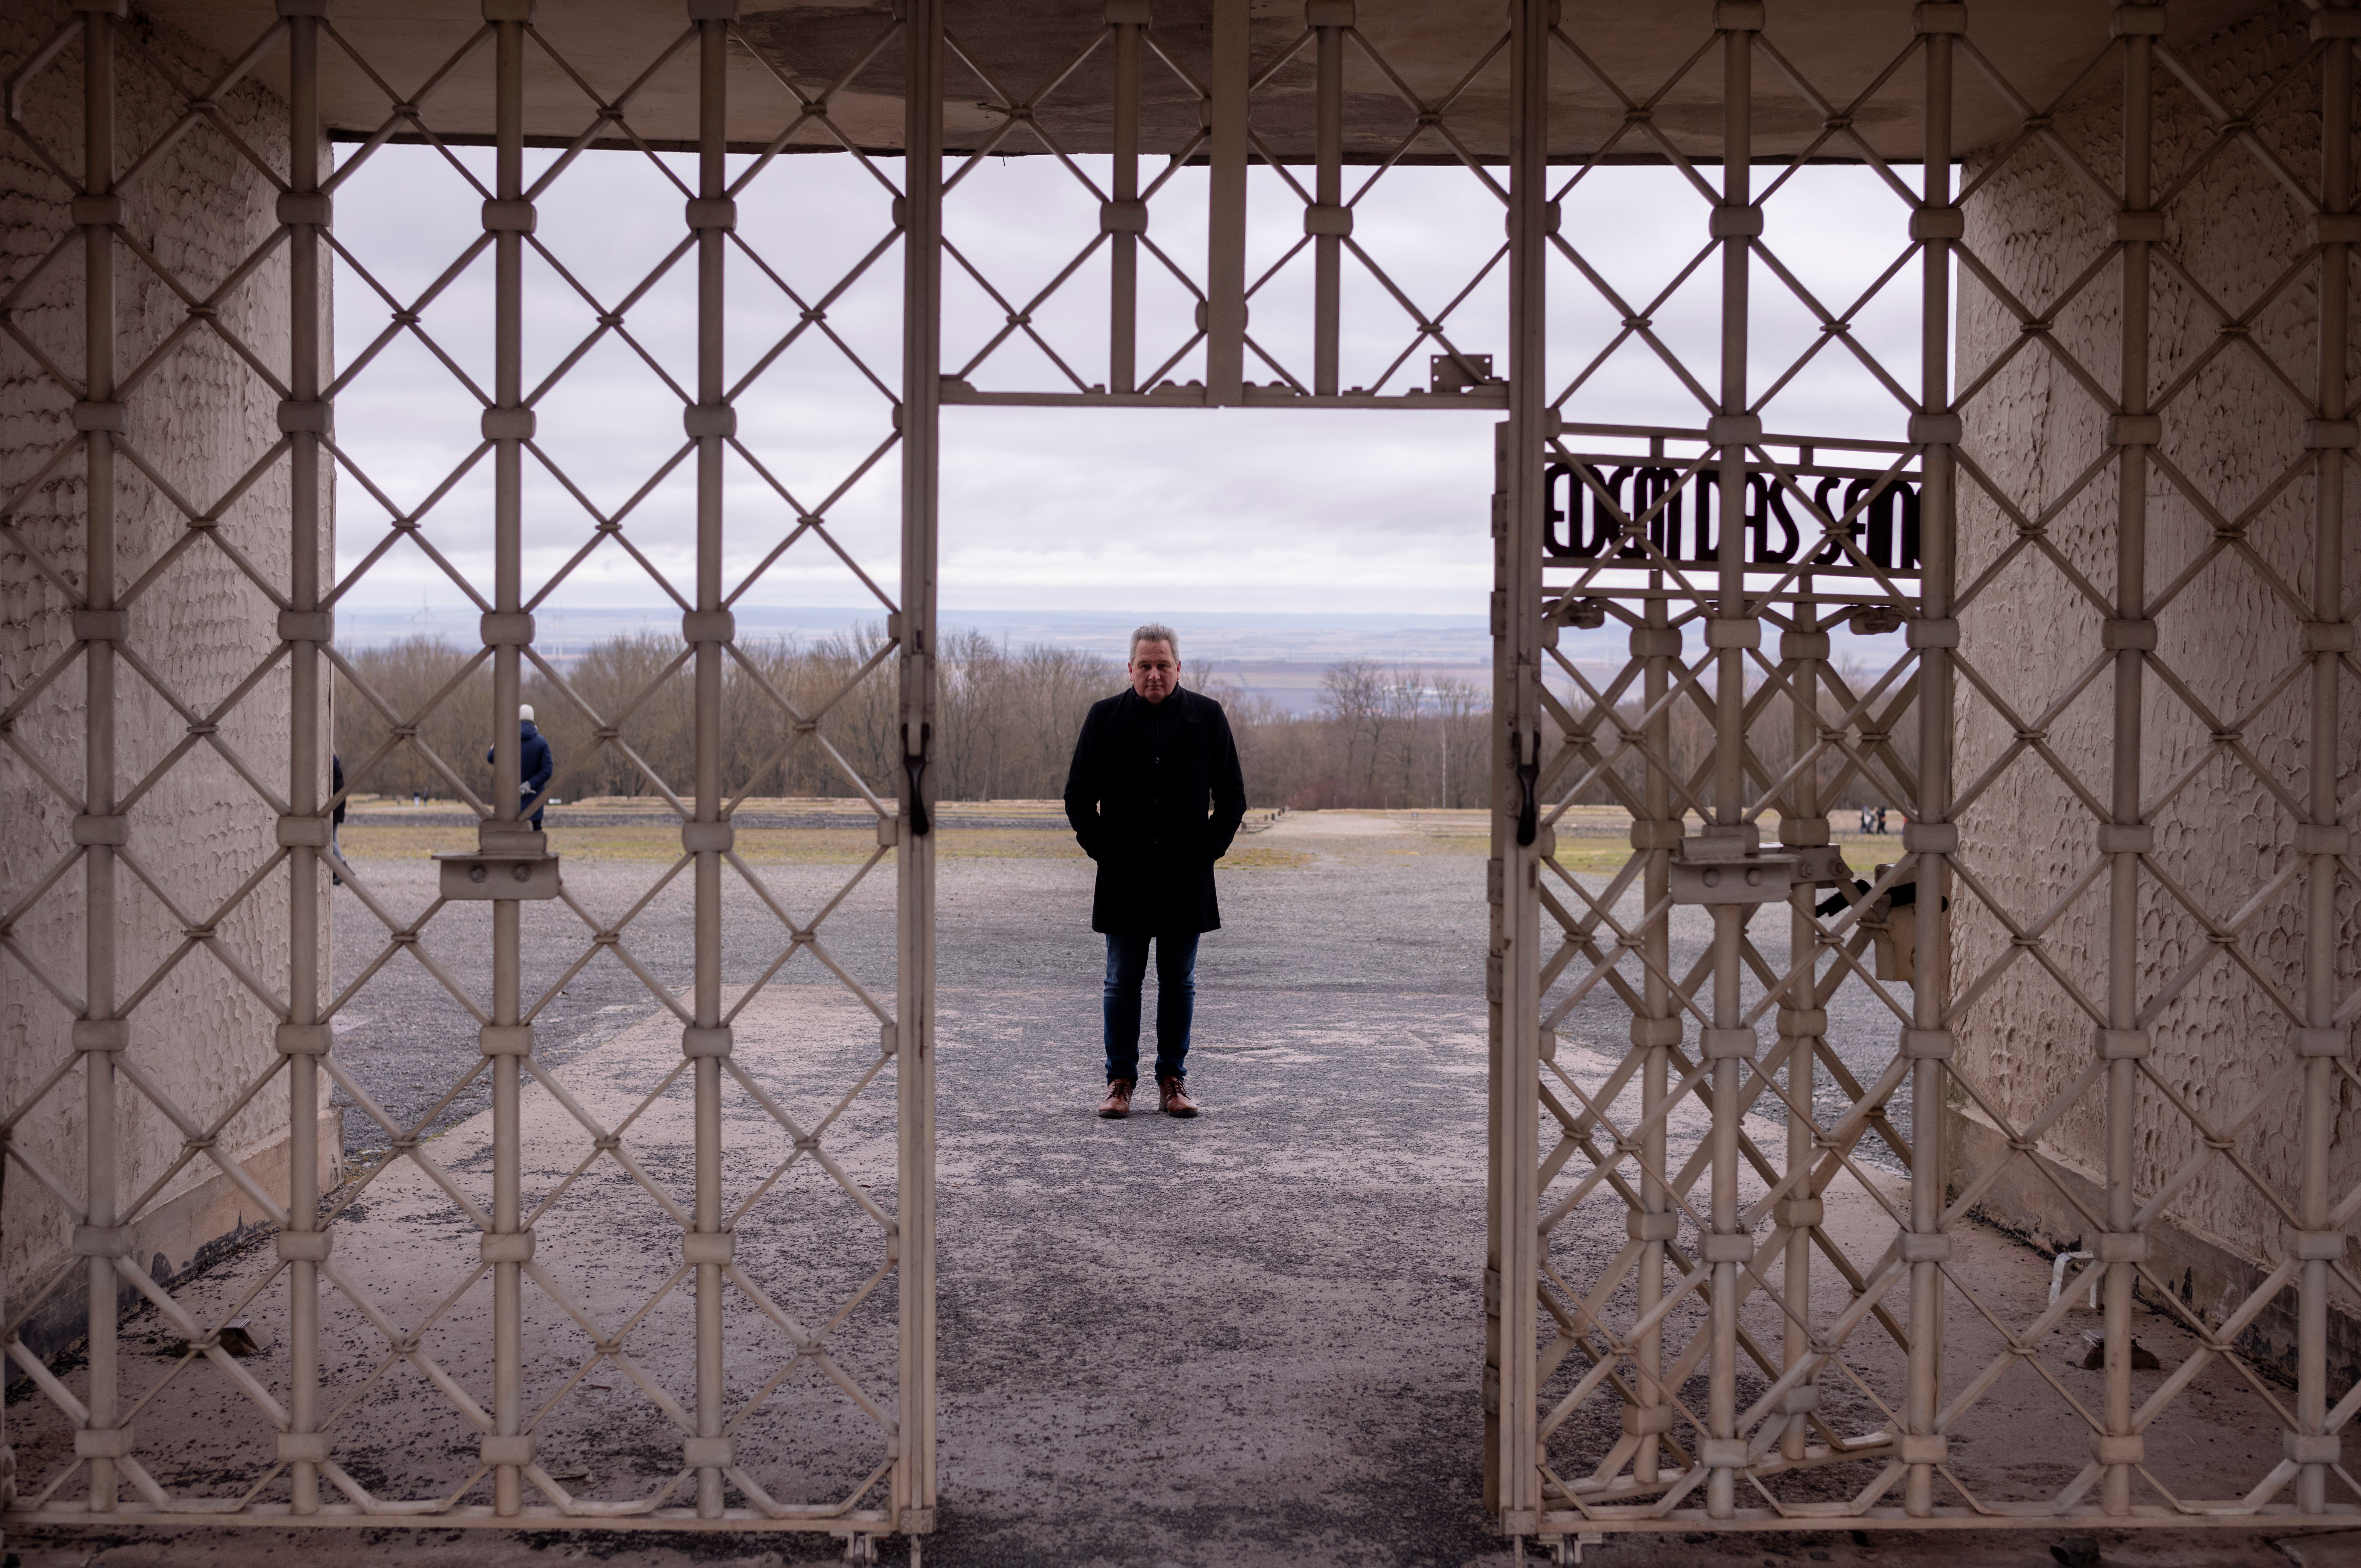 The head of the Buchenwald Memorial, Jens-Christian Wagner, poses for a photo behind the main gate of the former Nazi concentration camp in Weimar, Germany